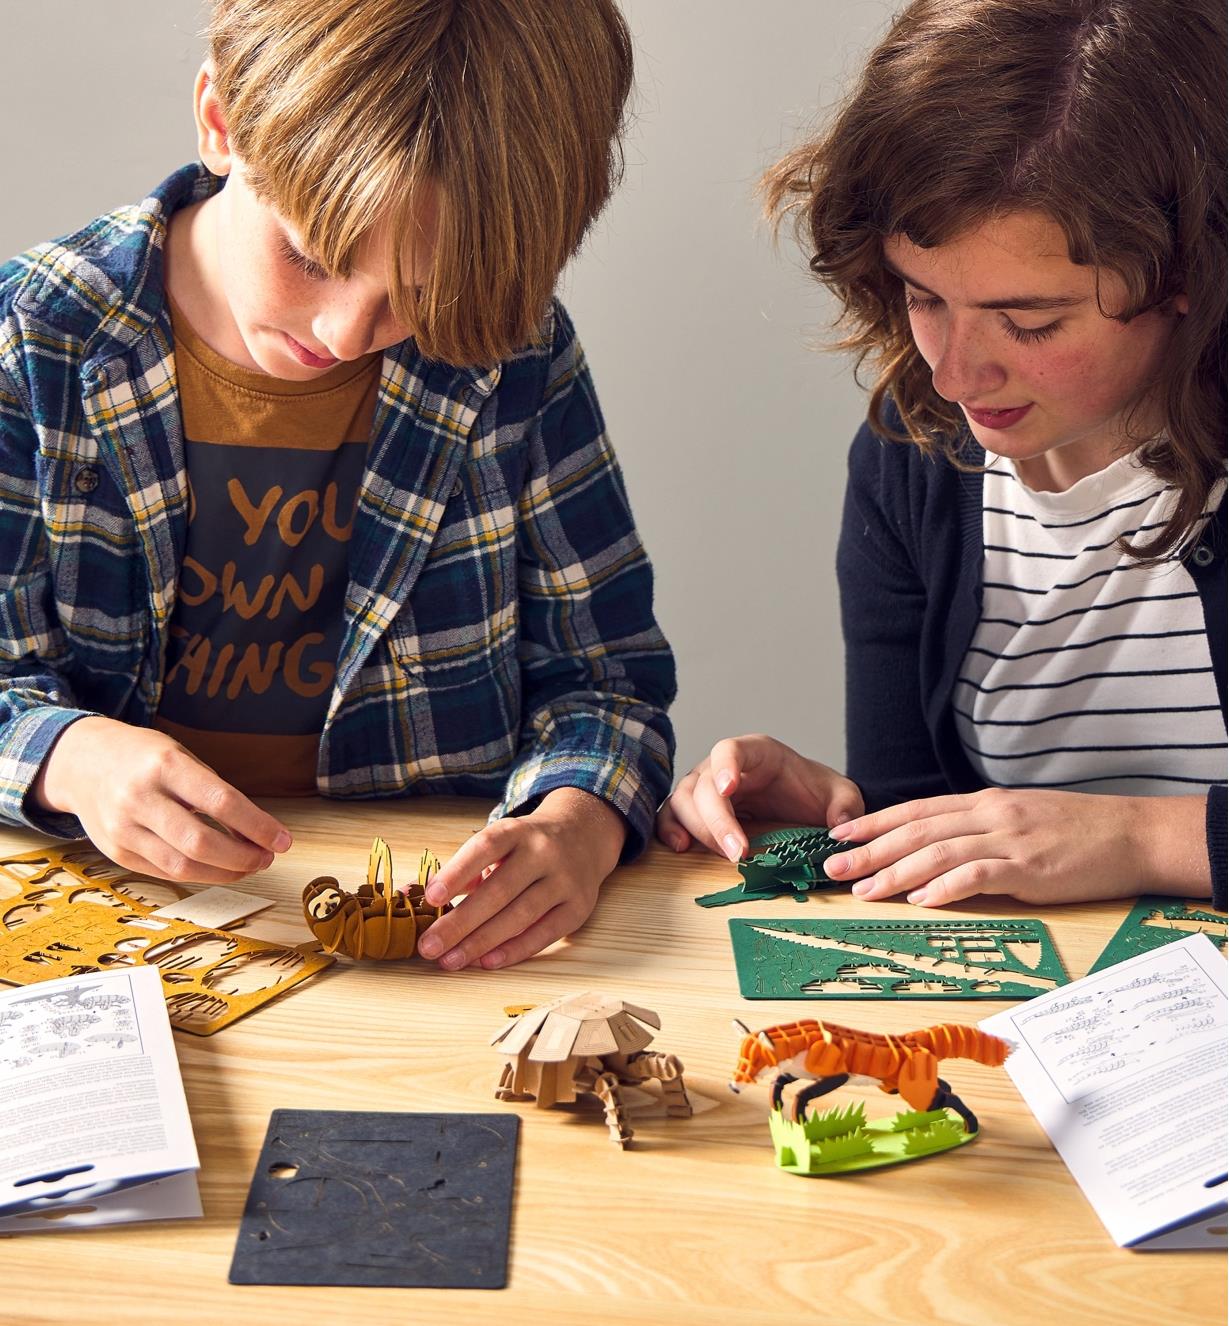 Two young people assemble paper animal models